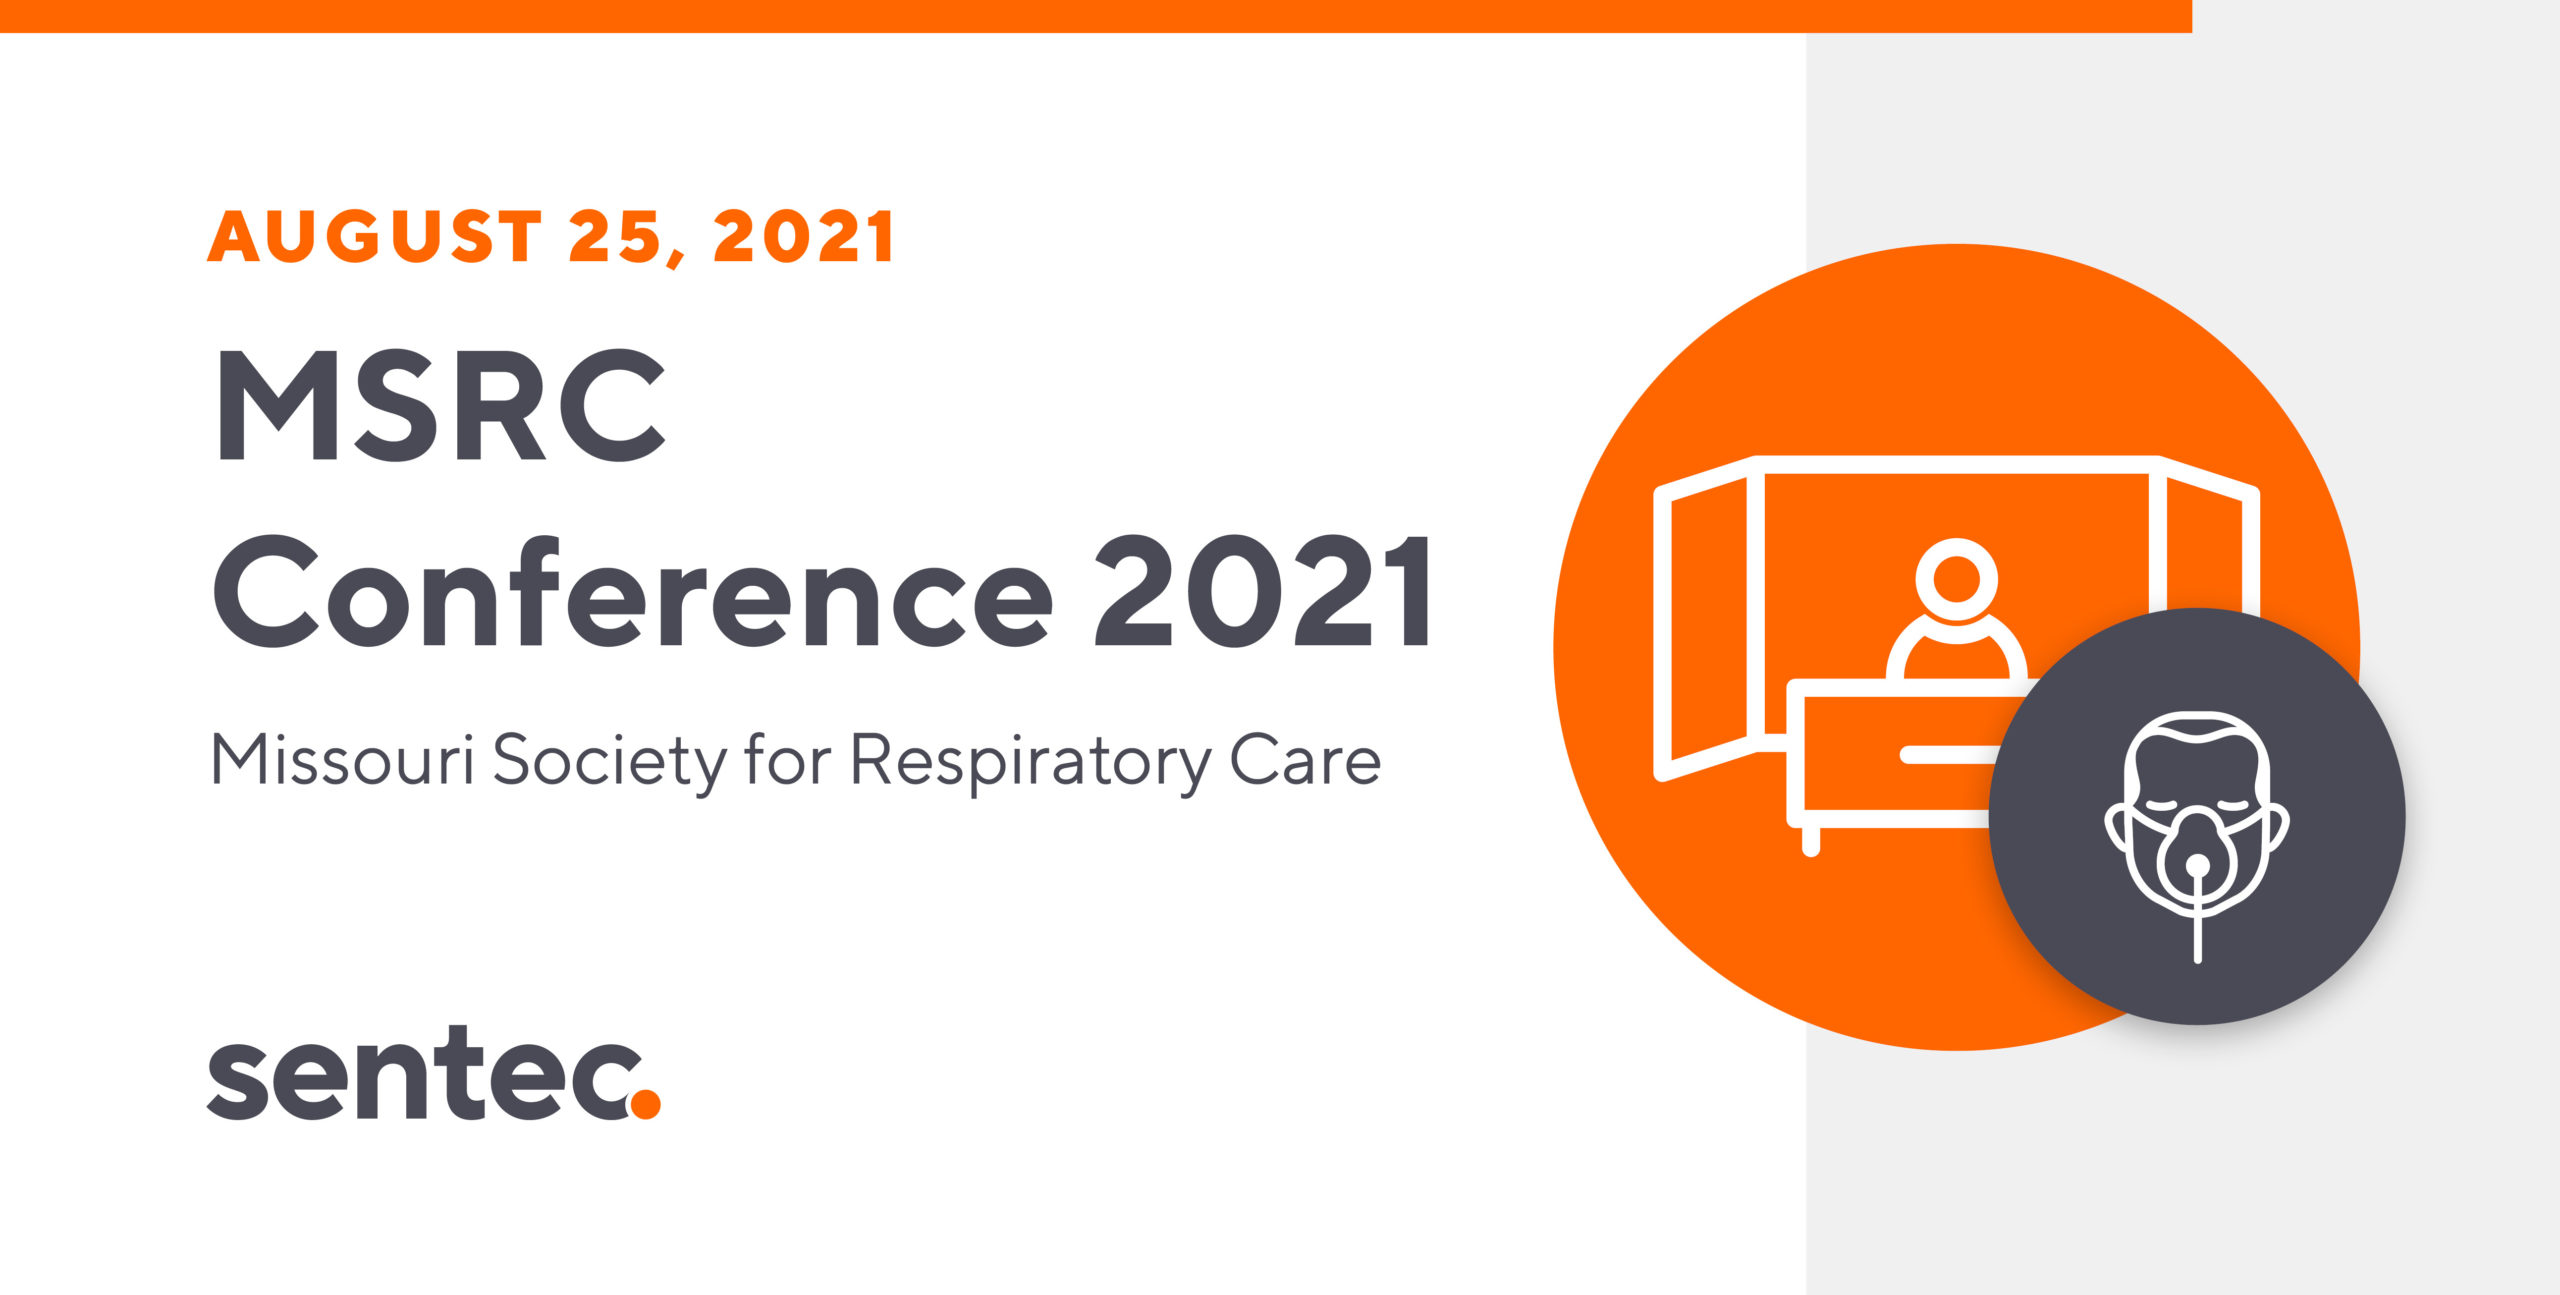 Missouri Society for Respiratory Care 49th Annual Conference